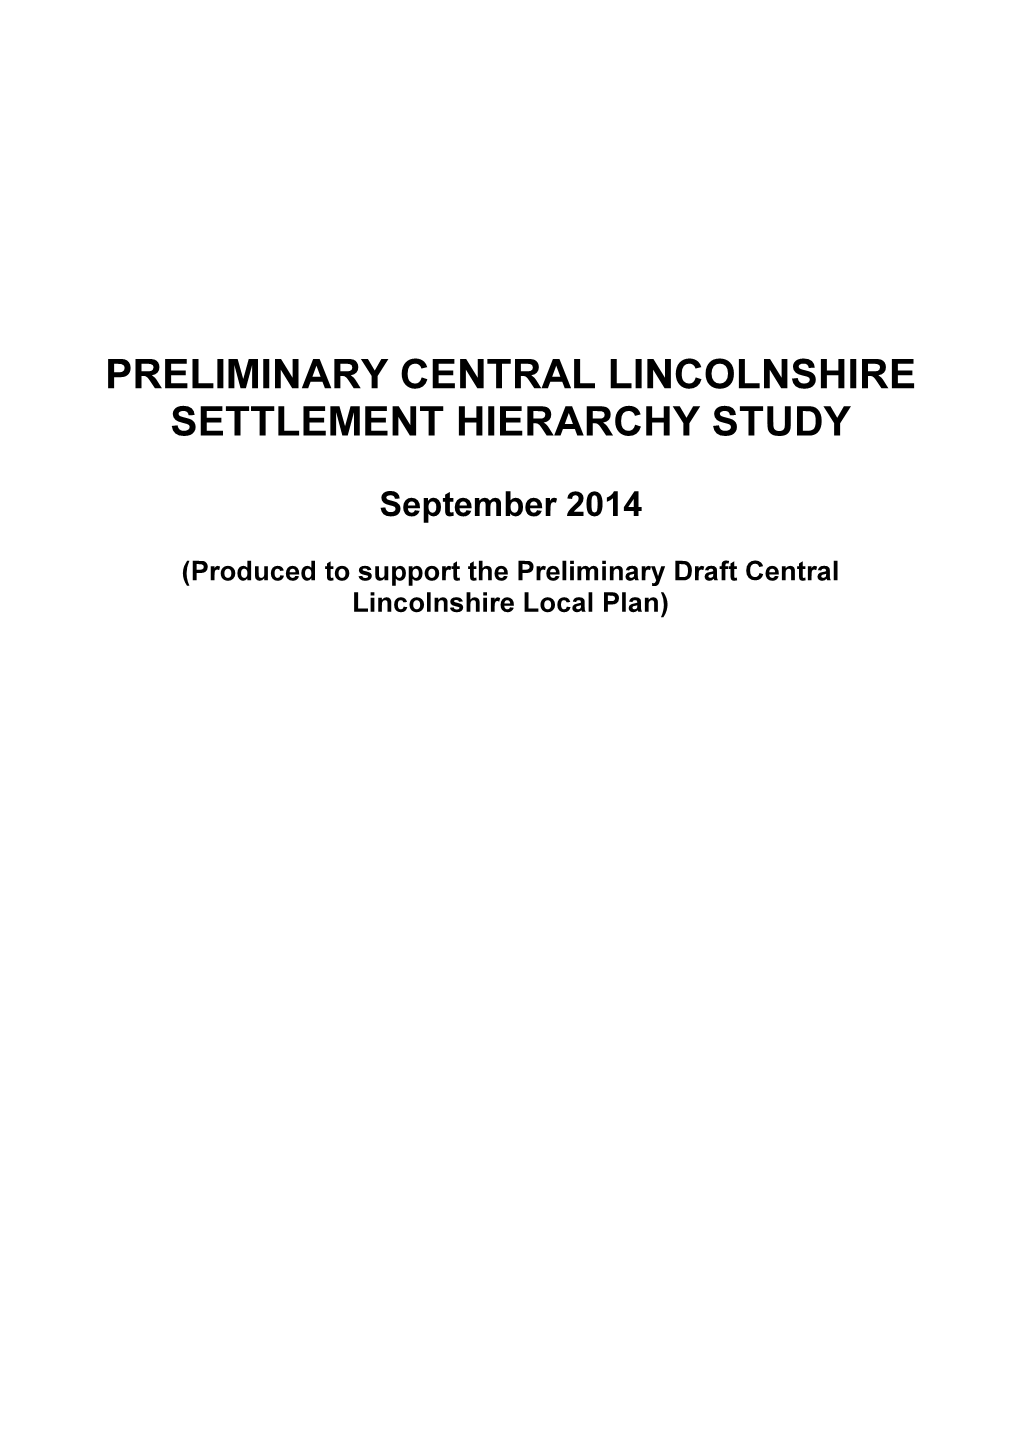 Preliminary Central Lincolnshire Settlement Hierarchy Study Sep 2014